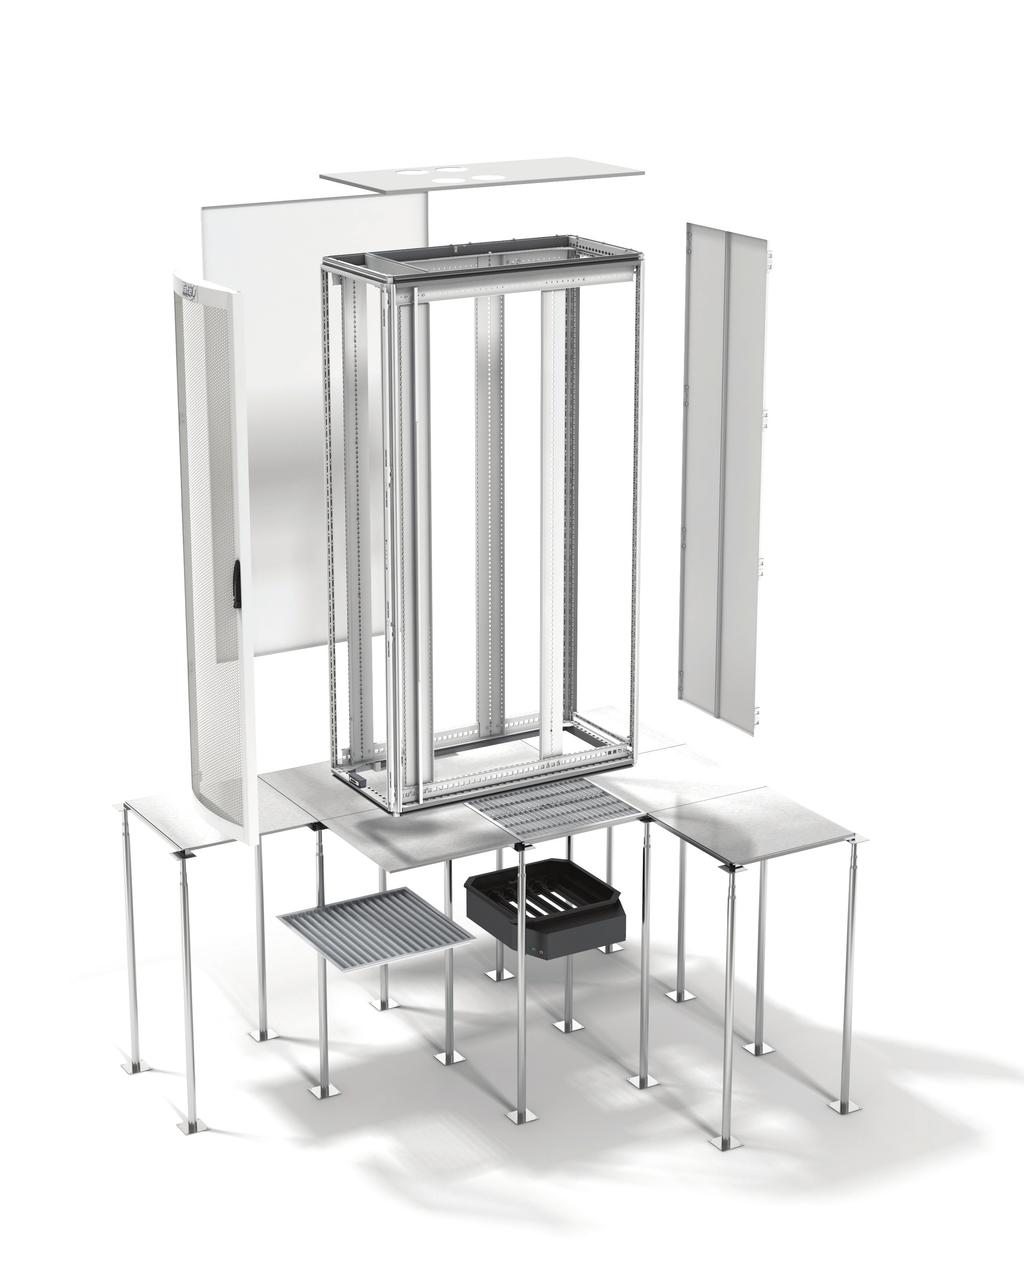 Intelligent Cabinet Design Flexible Design for High Performance Solid steel side panels for individual racks and ends of rows Top of rack features four punchouts to accommodate 4 round standard air